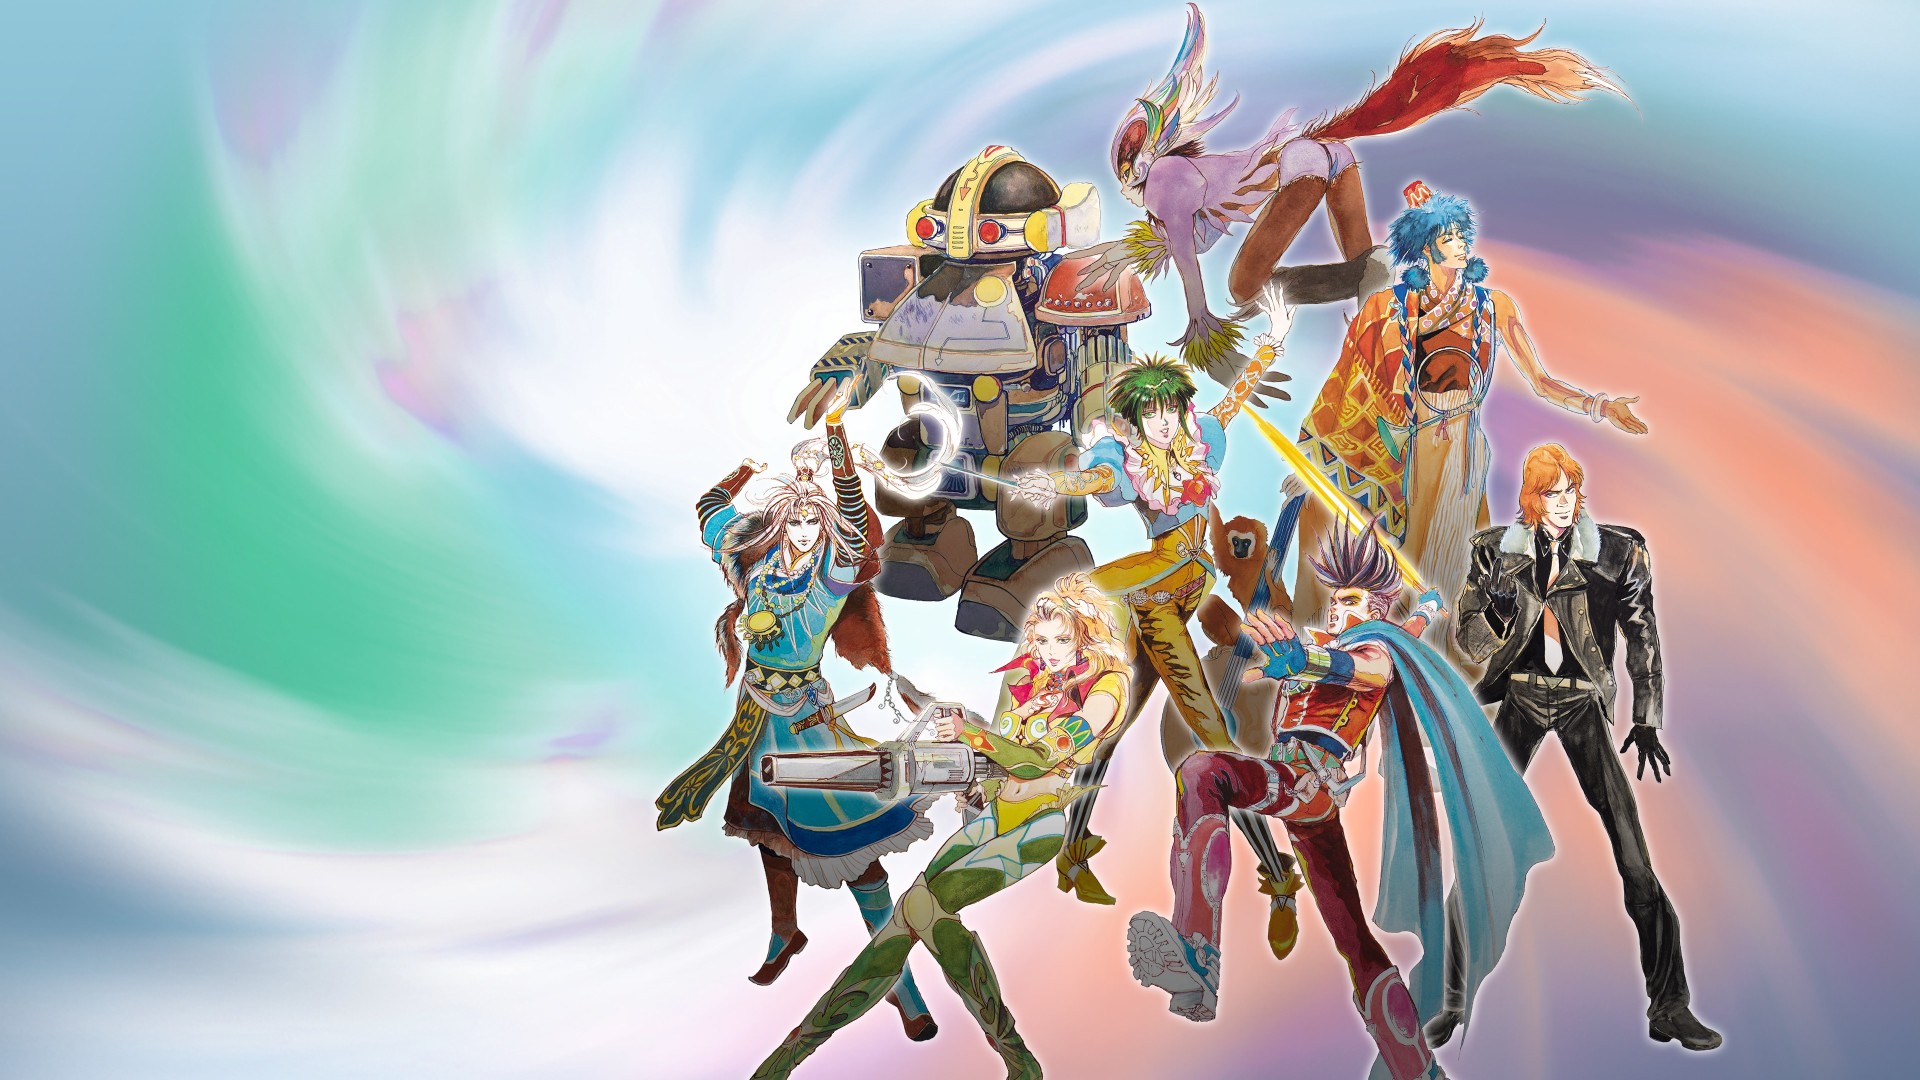 saga frontier remastered review ign